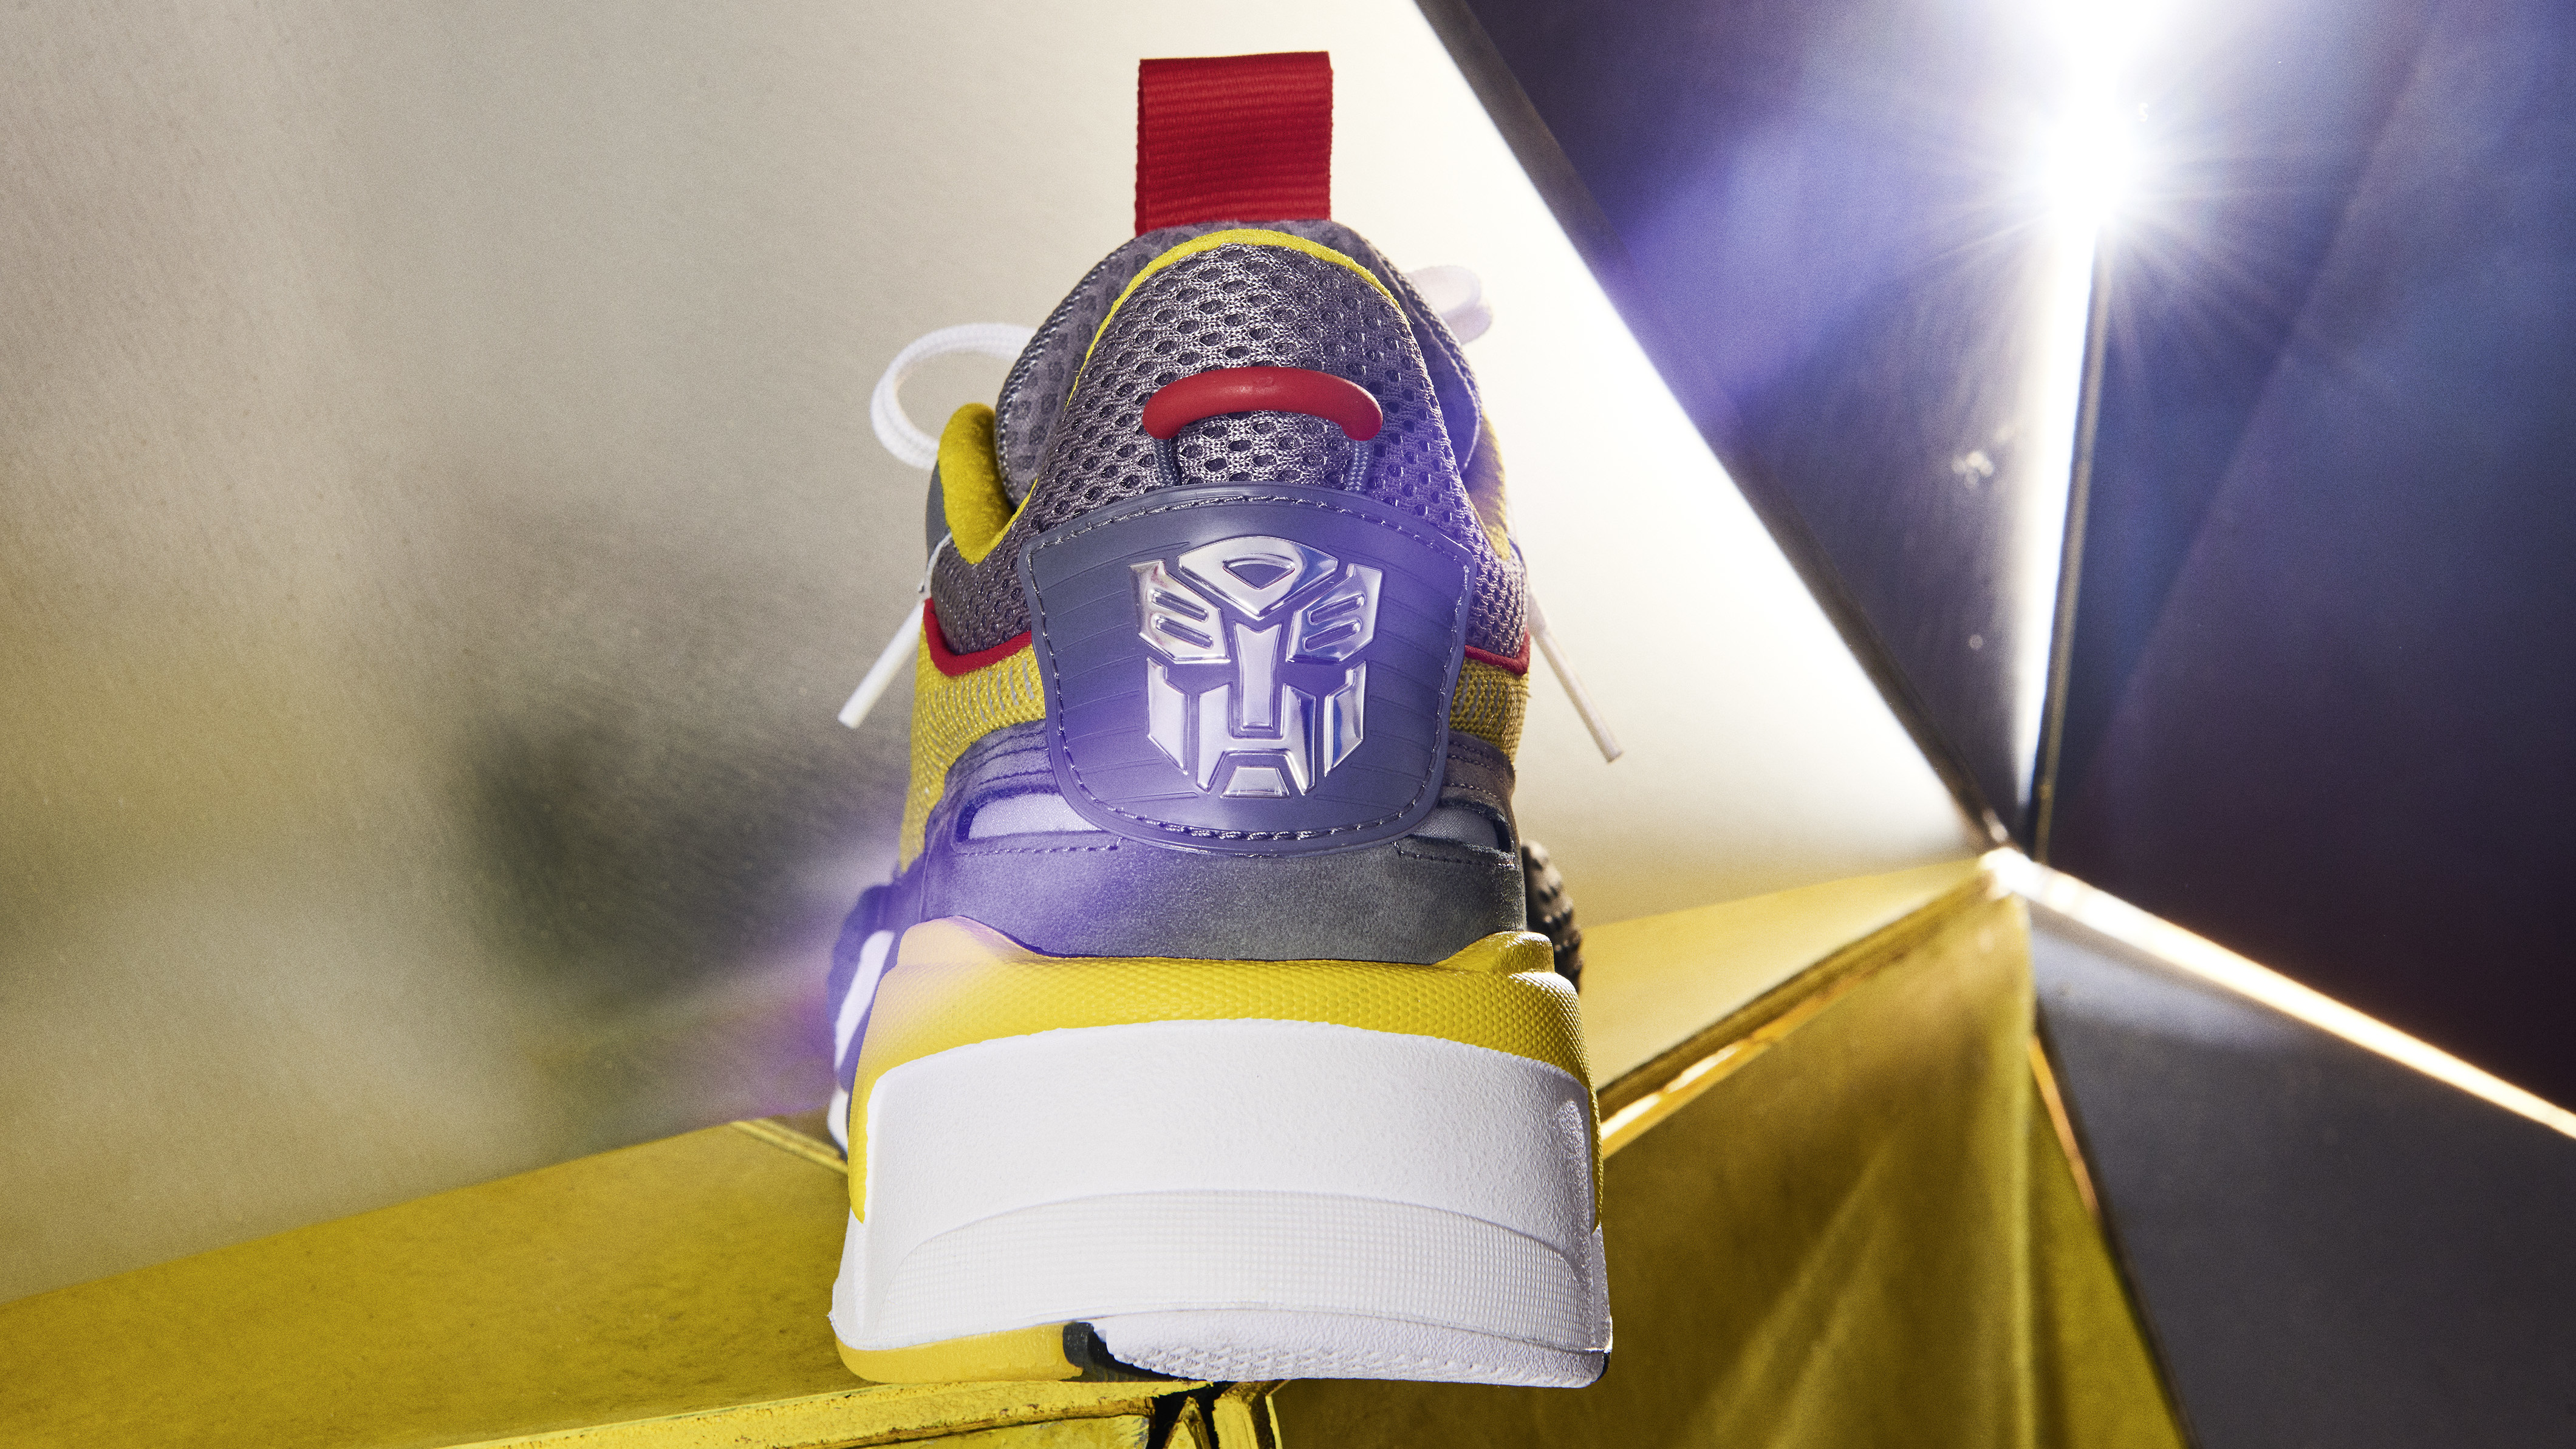 Aanpassing Academie Frons Puma Is Releasing a 'Transformers' Collection | Complex